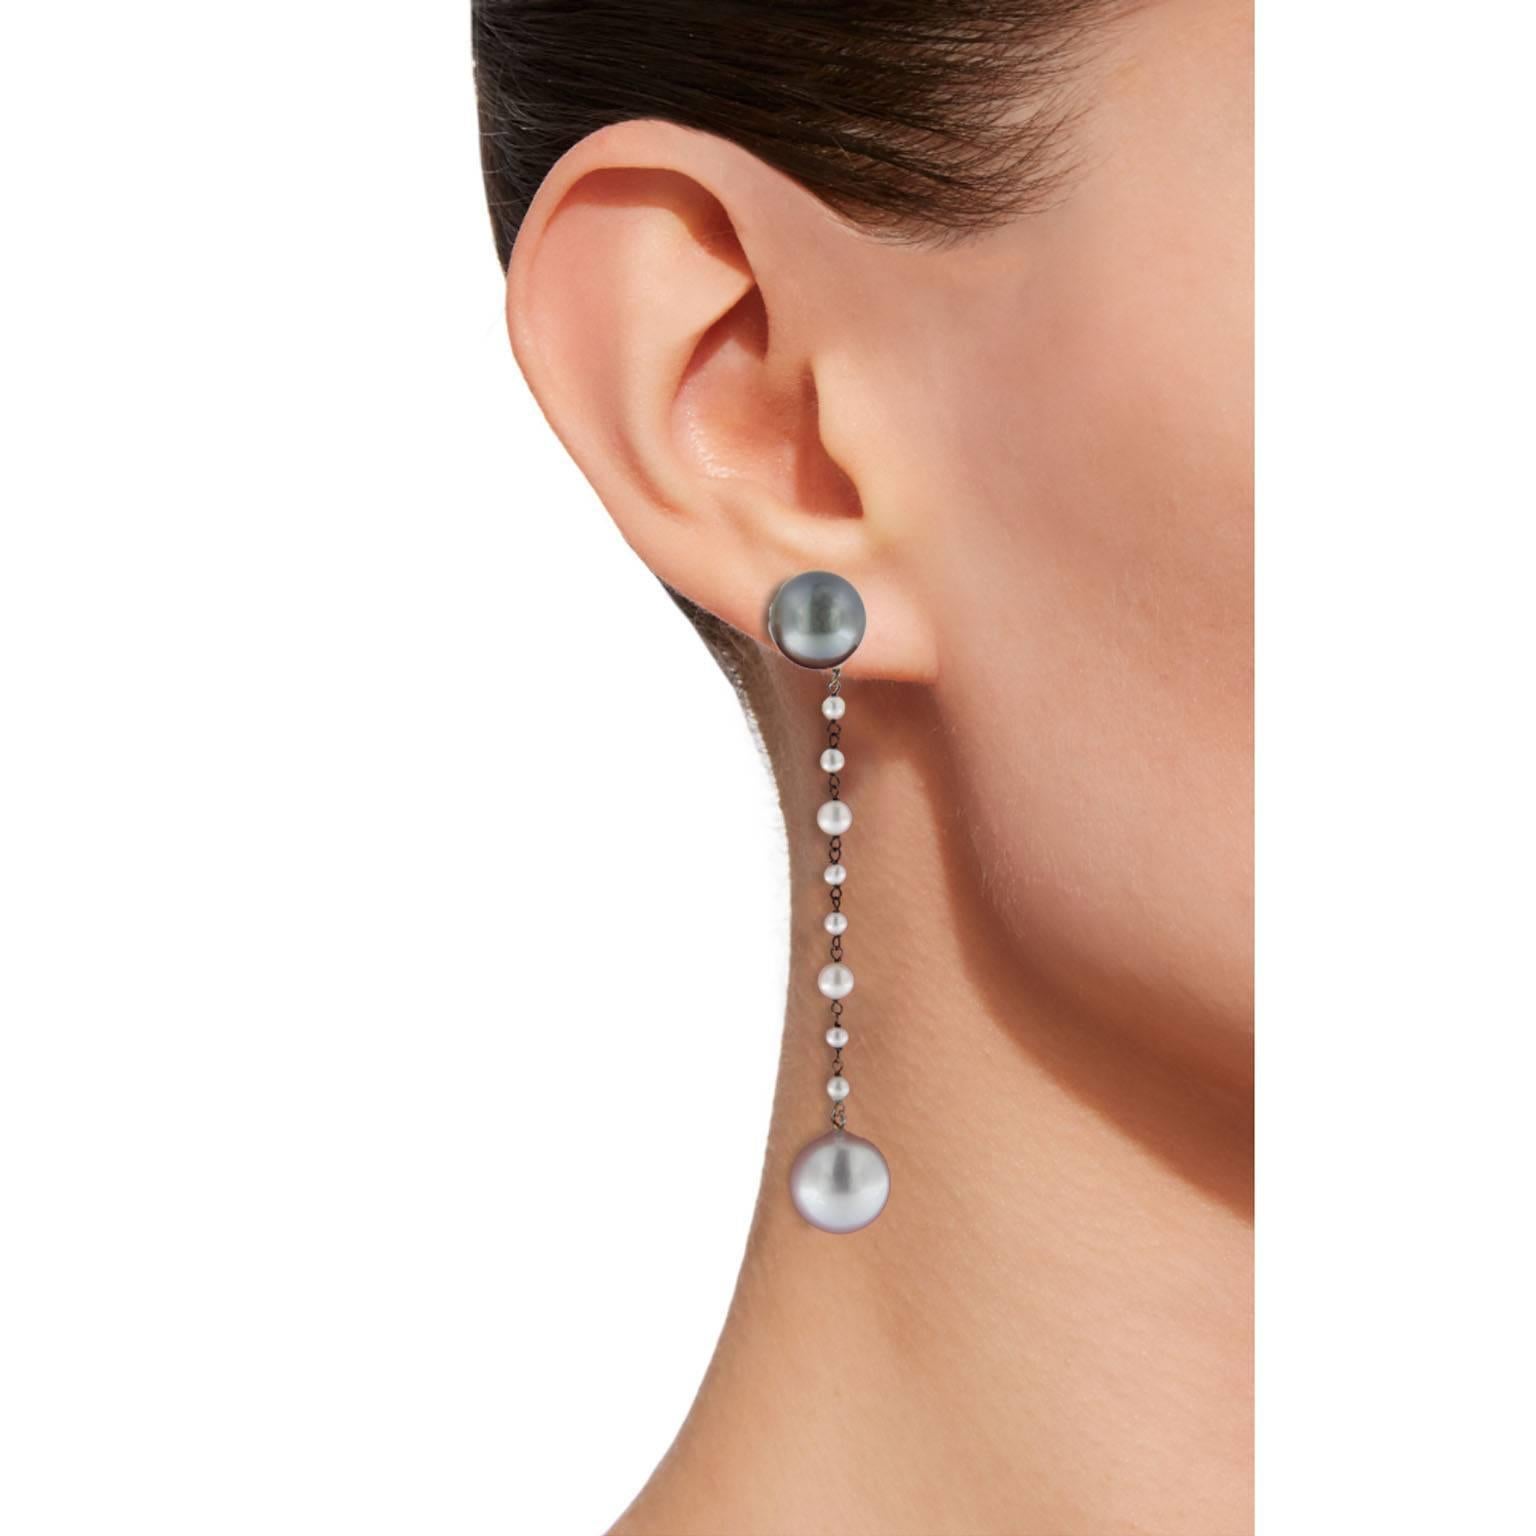 Jona design collection, hand crafted in Italy, 18 karat white gold dangle pearl earrings, showcasing two natural grey Tahiti pearls, two south sea white pearls and smaller white natural pearls.  The grey pearls may be worn separately, as stud